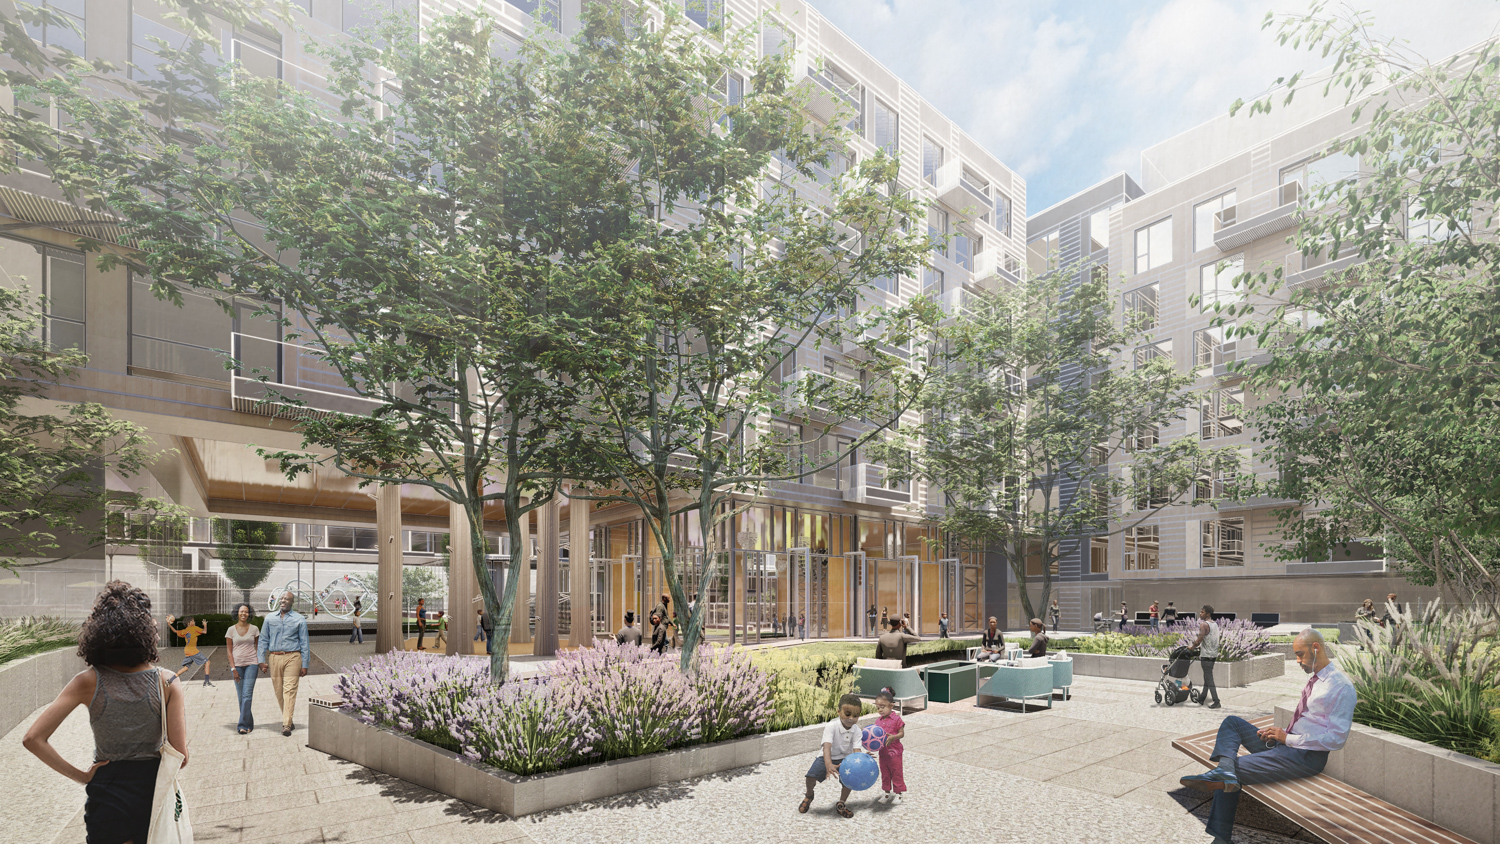 Freedom West plaza with surrounding housing, rendering by DLR Group